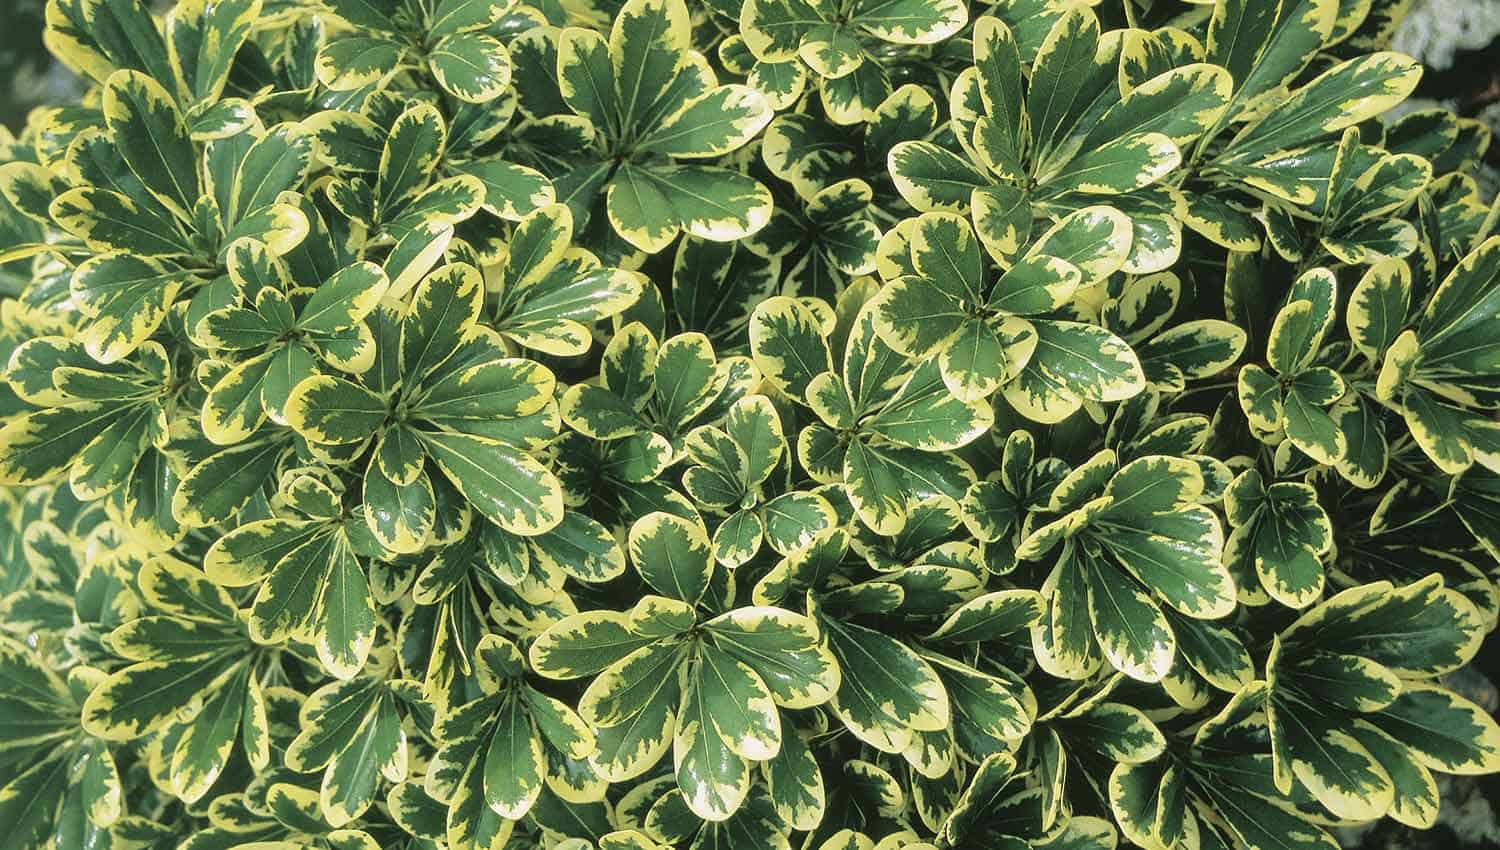 Close up view on Mojo Pittosporum foliage that is medium green with large cream colored margin